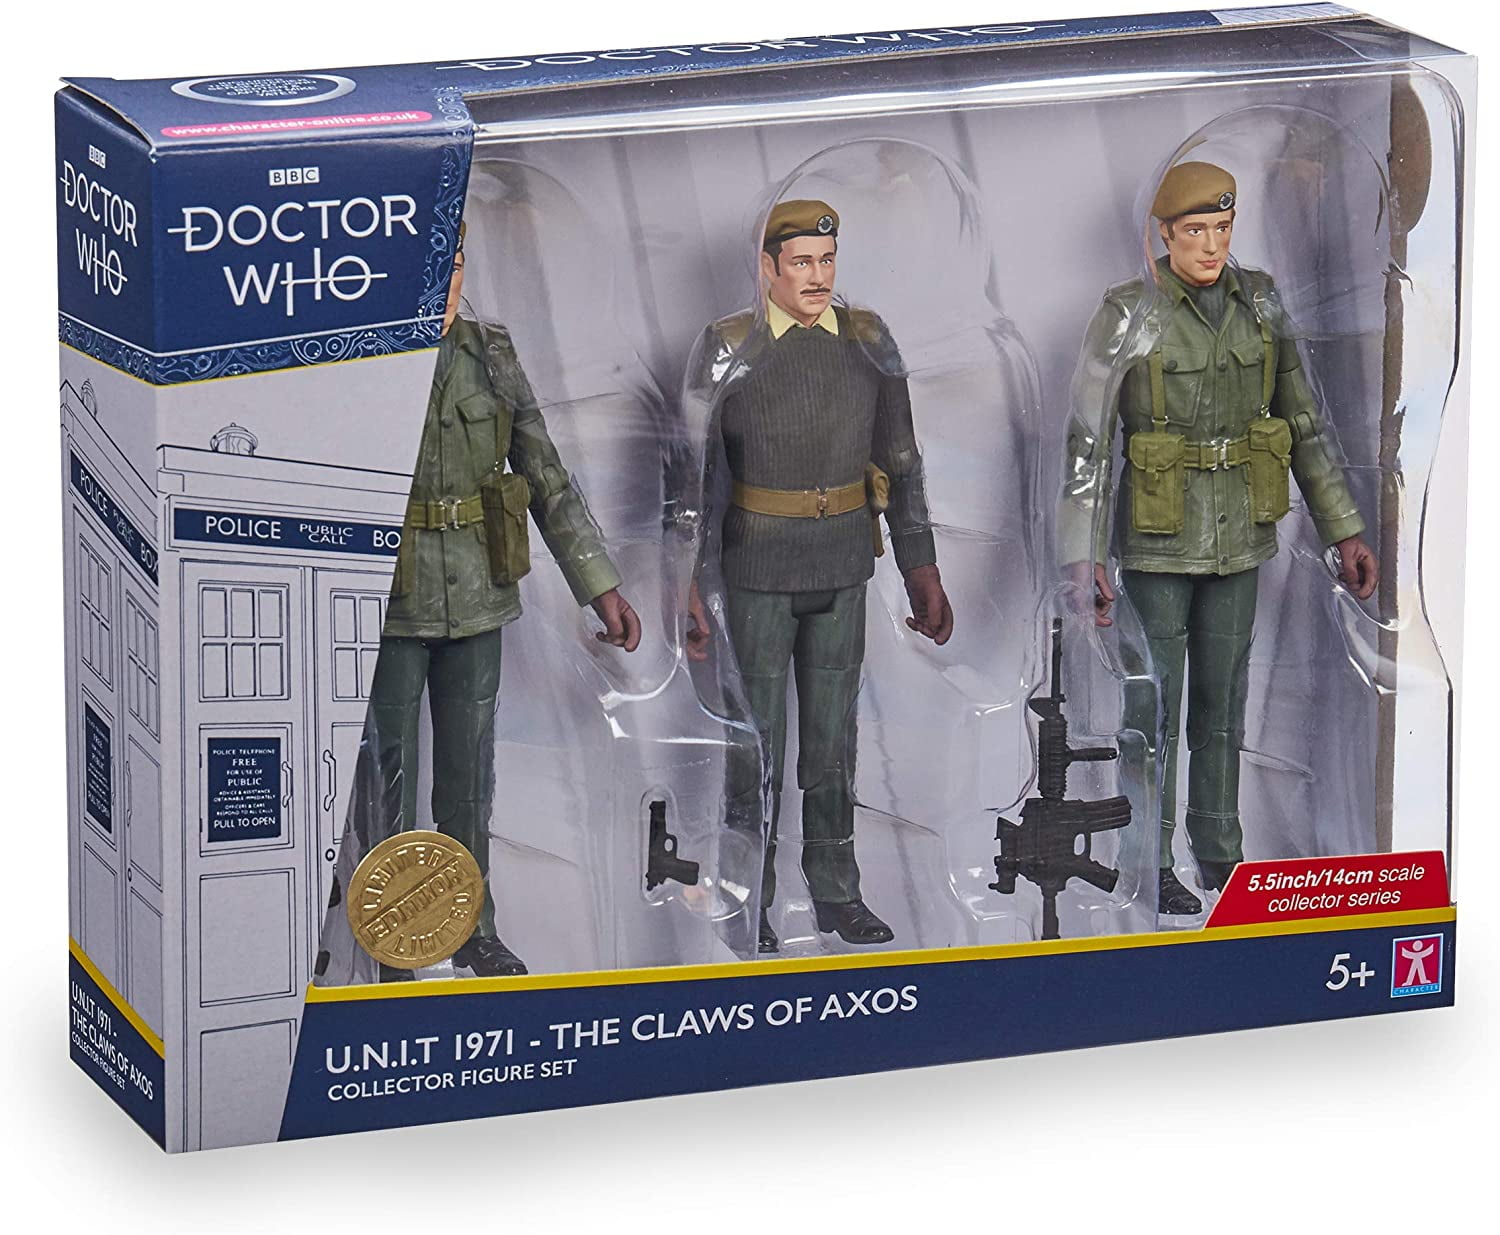 Doctor Who Claws of Axos Collectors Action Figure 3-Pack NEW 